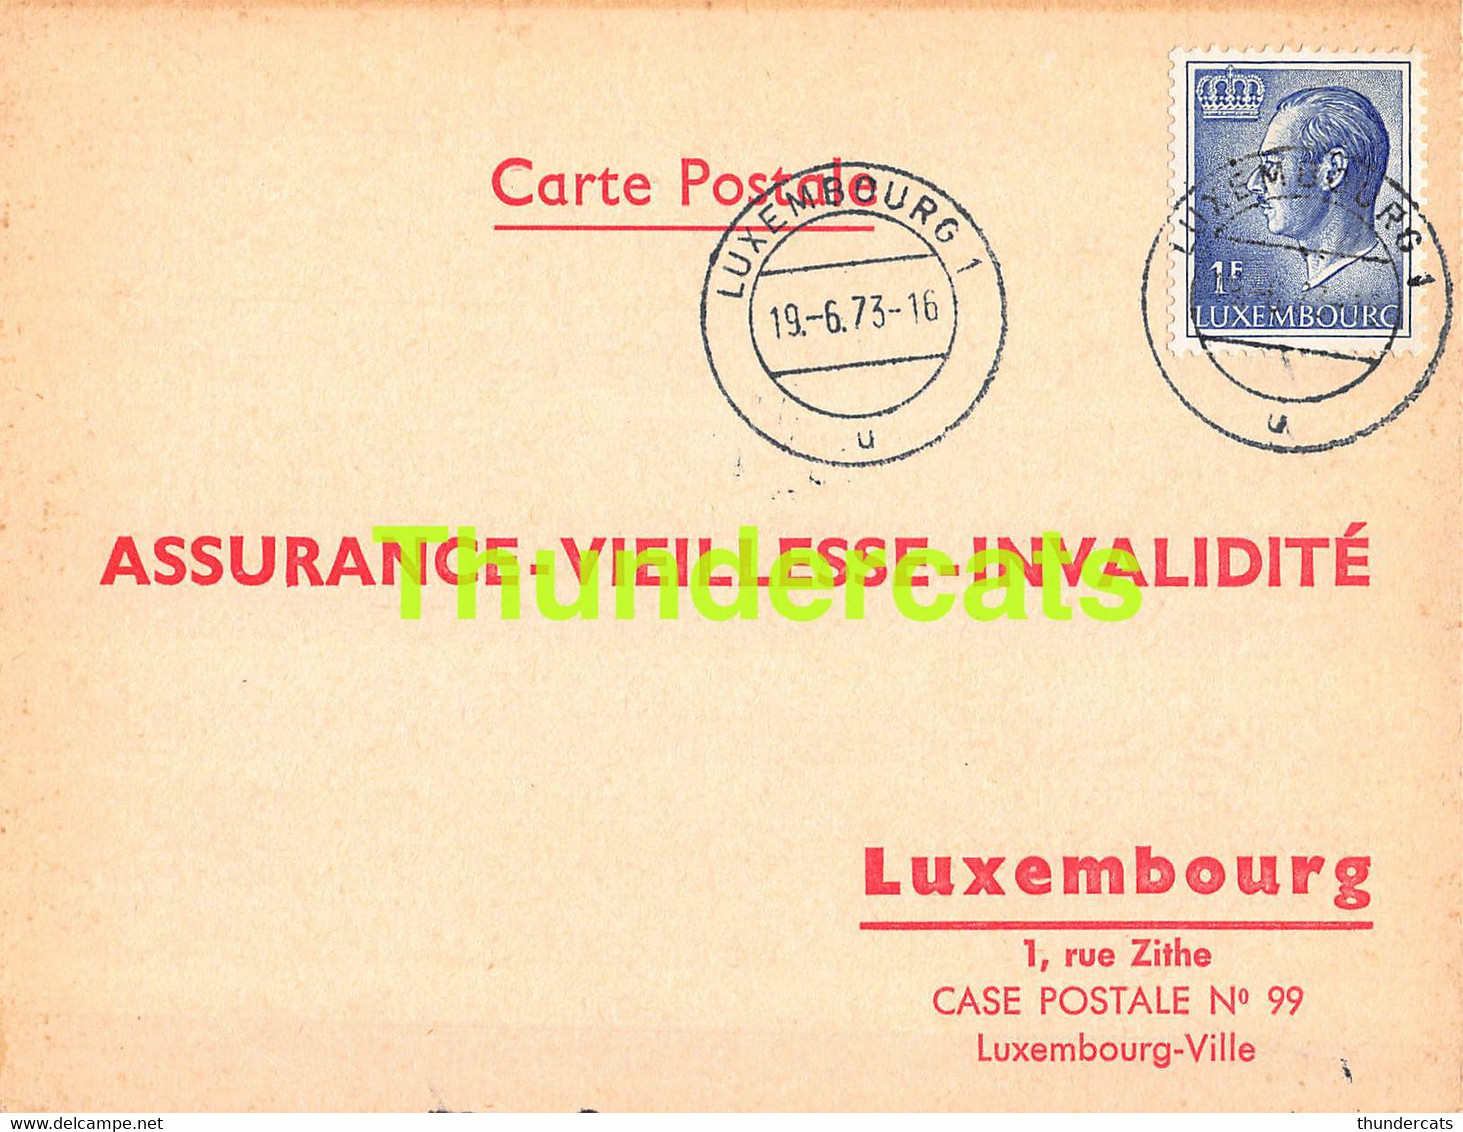 ASSURANCE VIEILLESSE INVALIDITE LUXEMBOURG 1973 ROLLINGER THEVES - Briefe U. Dokumente